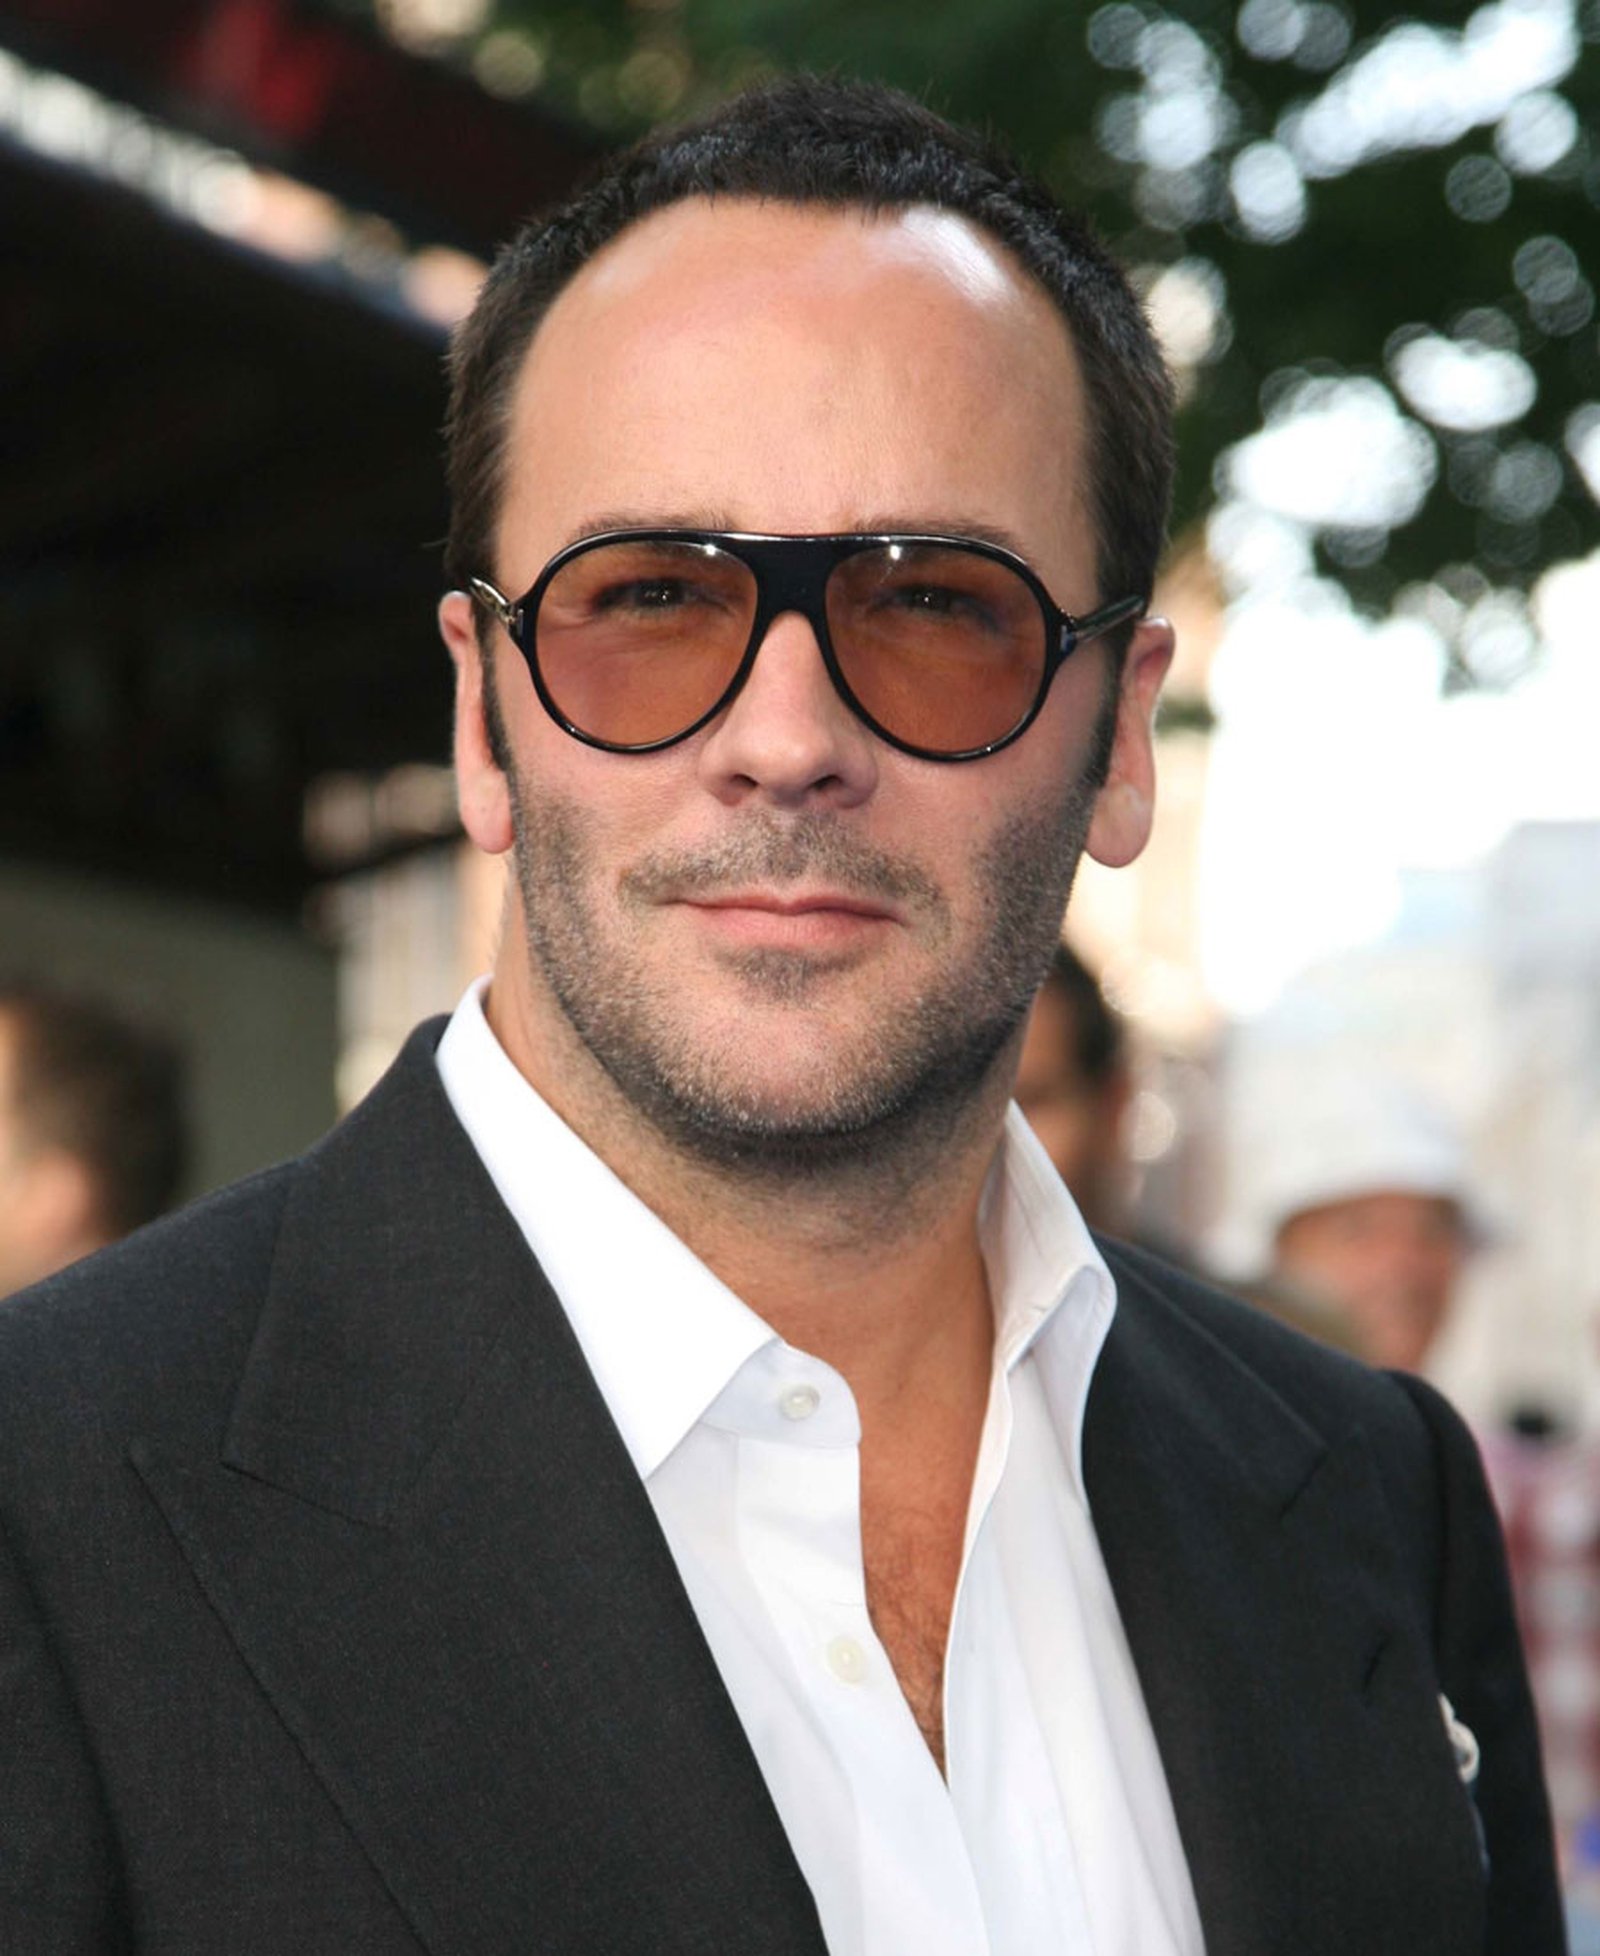 Tom Ford launches expensive pair of jeans